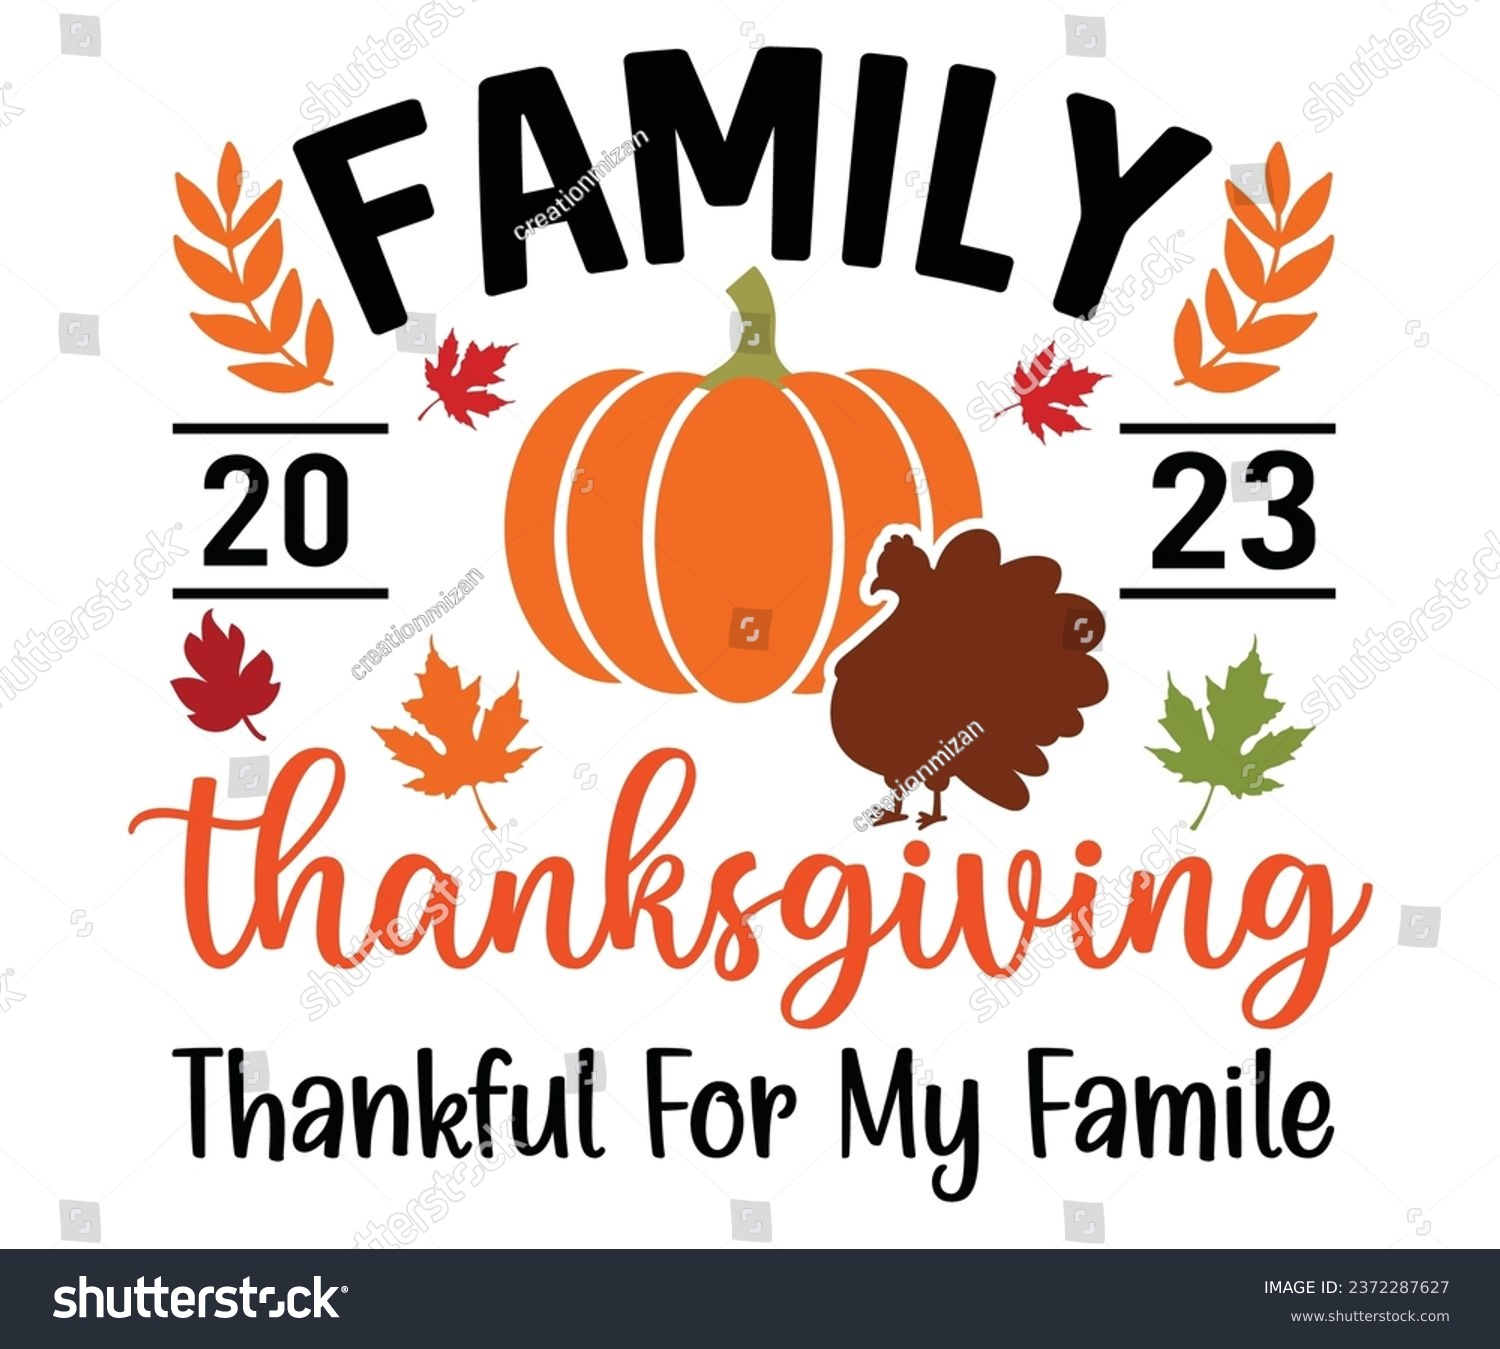 SVG of FAMILY Thanksgiving 2023 Time spent together  Svg,Thanksgiving Tote Bag,Happy Thanksgiving,Happy Turkey Day, Eat Drink and Be Thankfulsvg,Matching Family svg,Thanksgiving family re svg